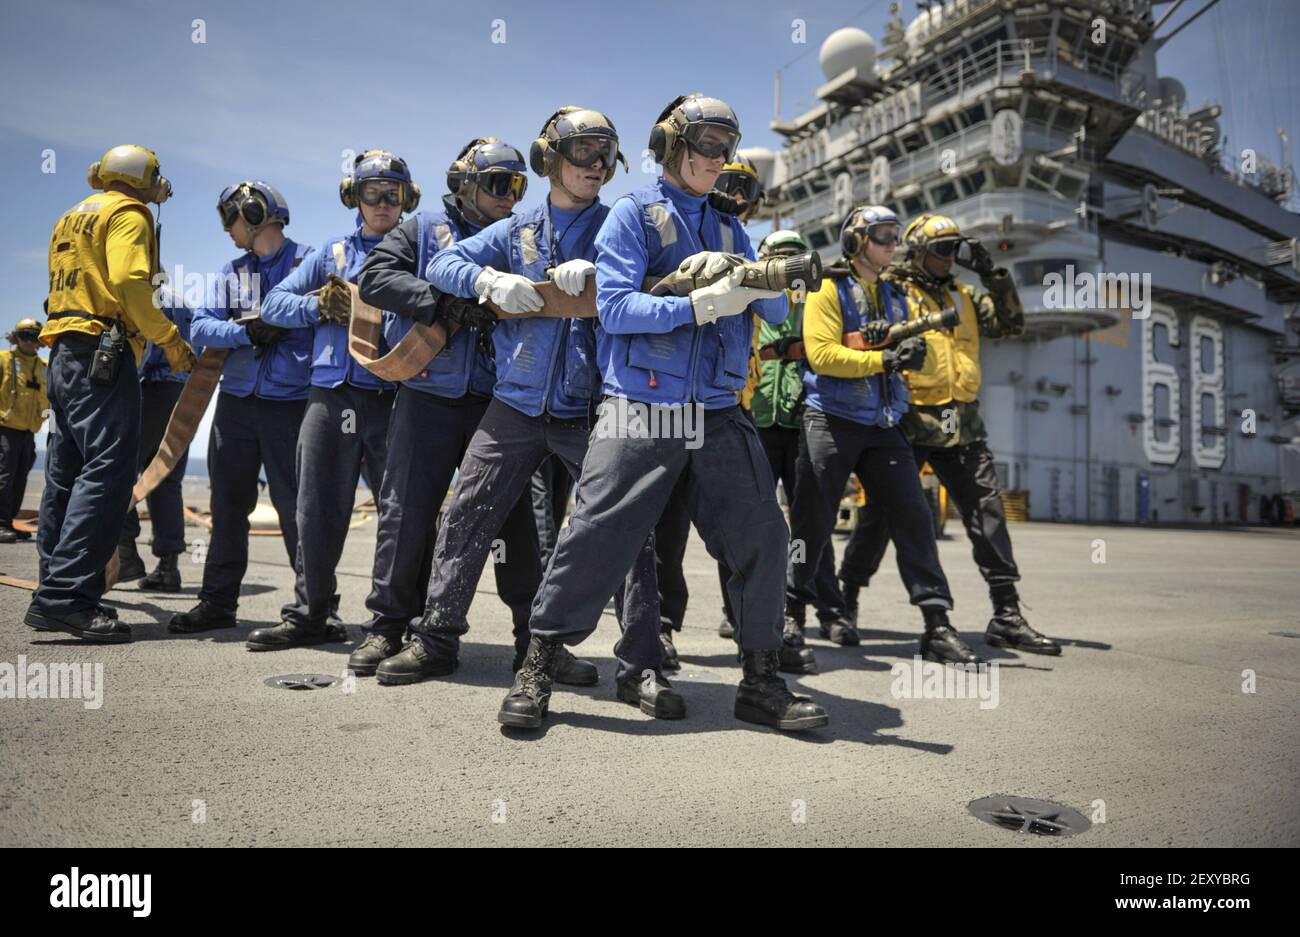 PACIFIC OCEAN (June 20, 2014) Sailors conduct a firefighting drill on the flight deck aboard the aircraft carrier USS Nimitz (CVN 68). Nimitz is underway performing routine operations and training exercises. (Photo by Mass Communication Specialist 3rd Class Aiyana S. Paschal/US Navy/Sipa USA) Stock Photo